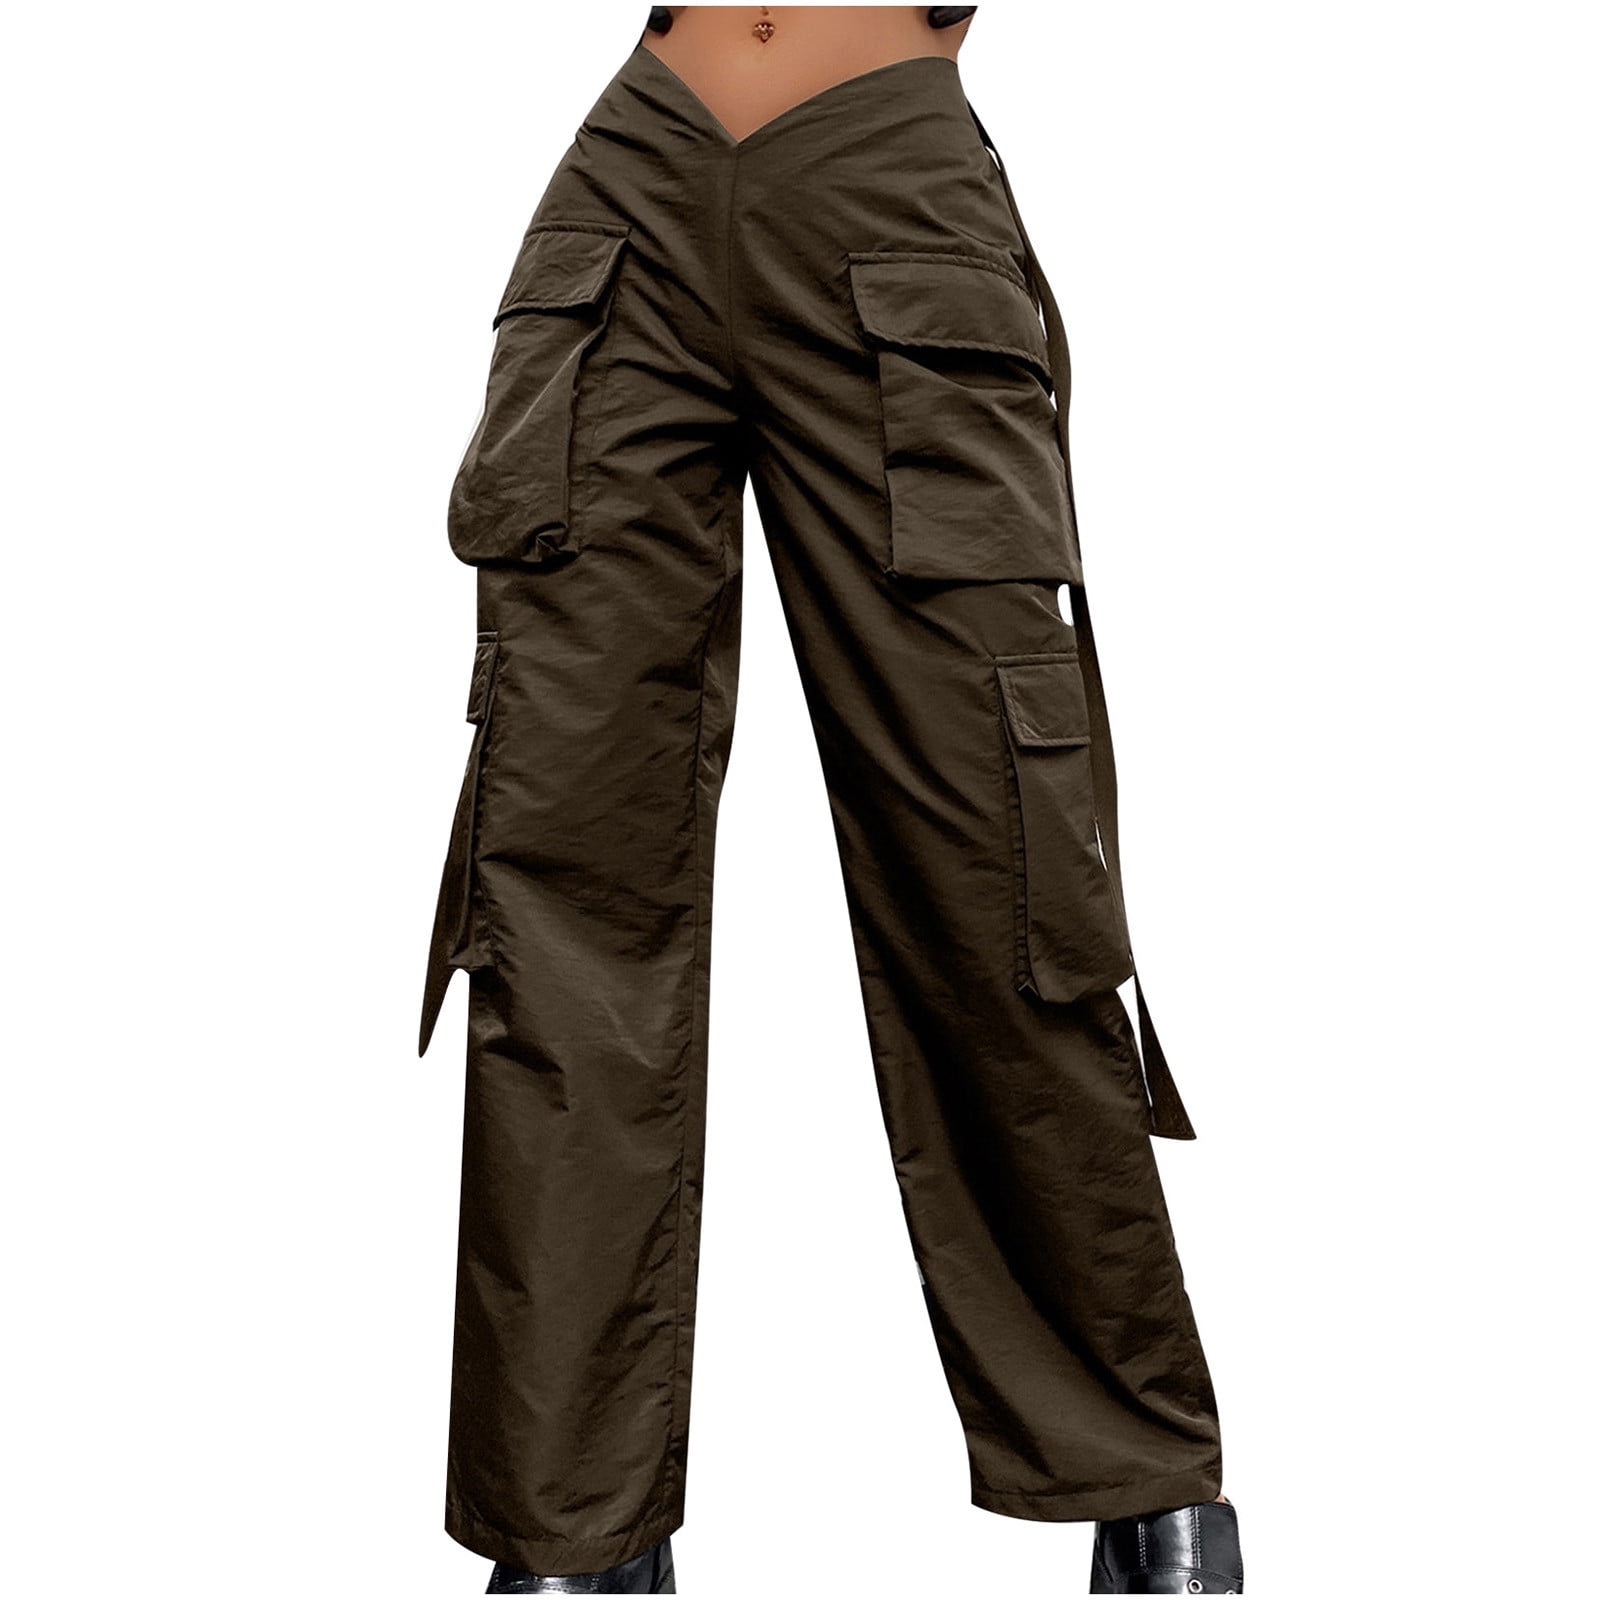 AherBiu Cargo Pants Women High Waisted Joggers Sweatpants Athletic Work  Pants Baggy Casual Cotton Pocket Hiking Trousers